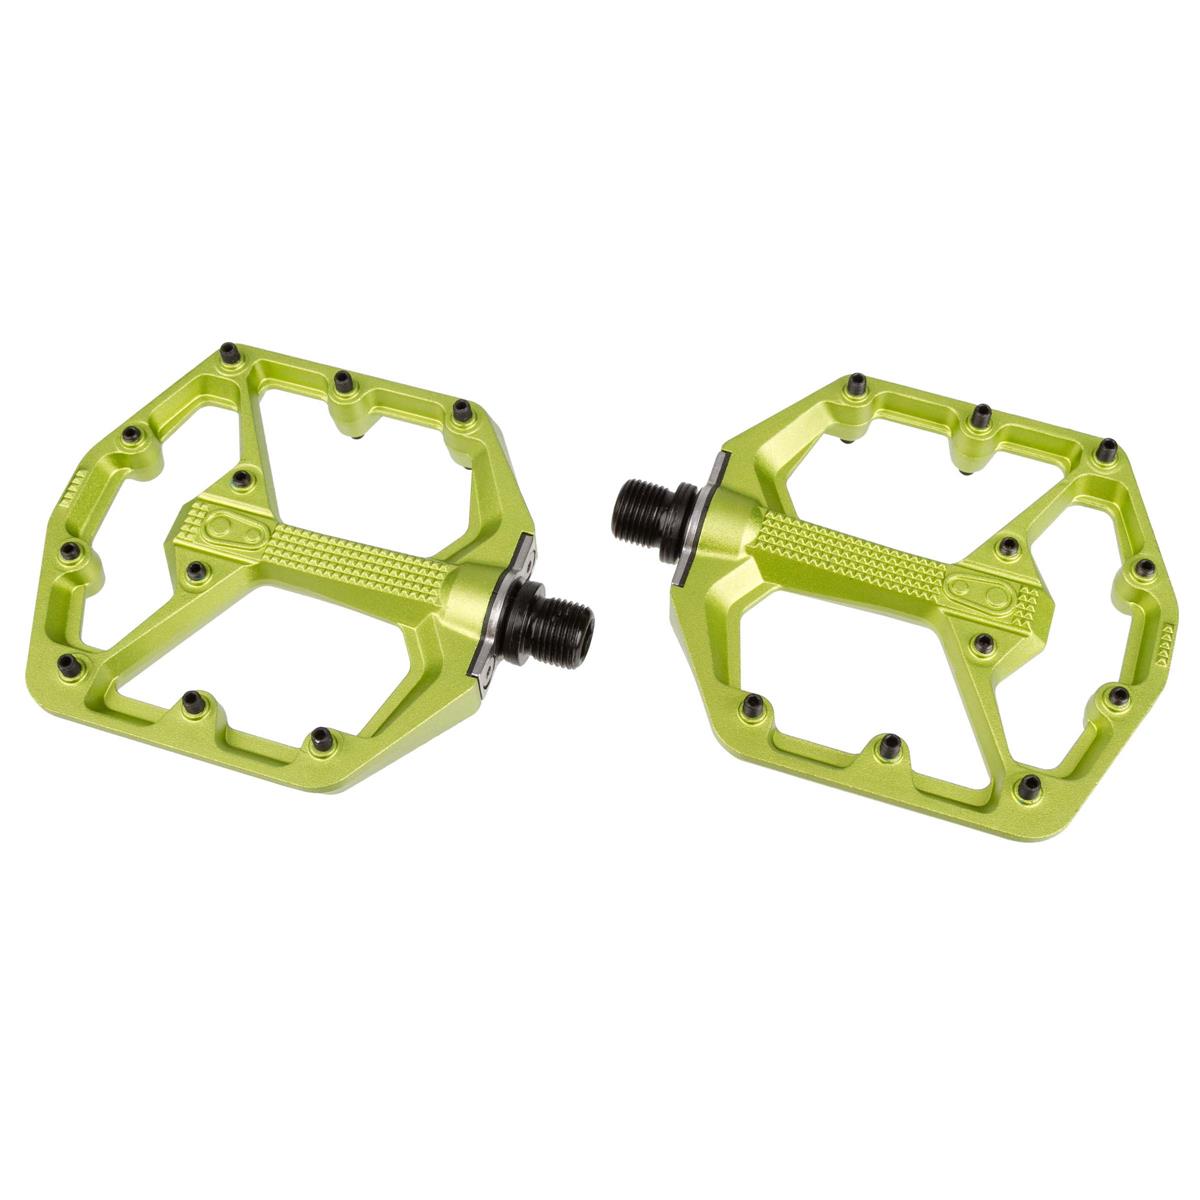 Crankbrothers Pédales Stamp 7 Limited Edition, Vert, Small